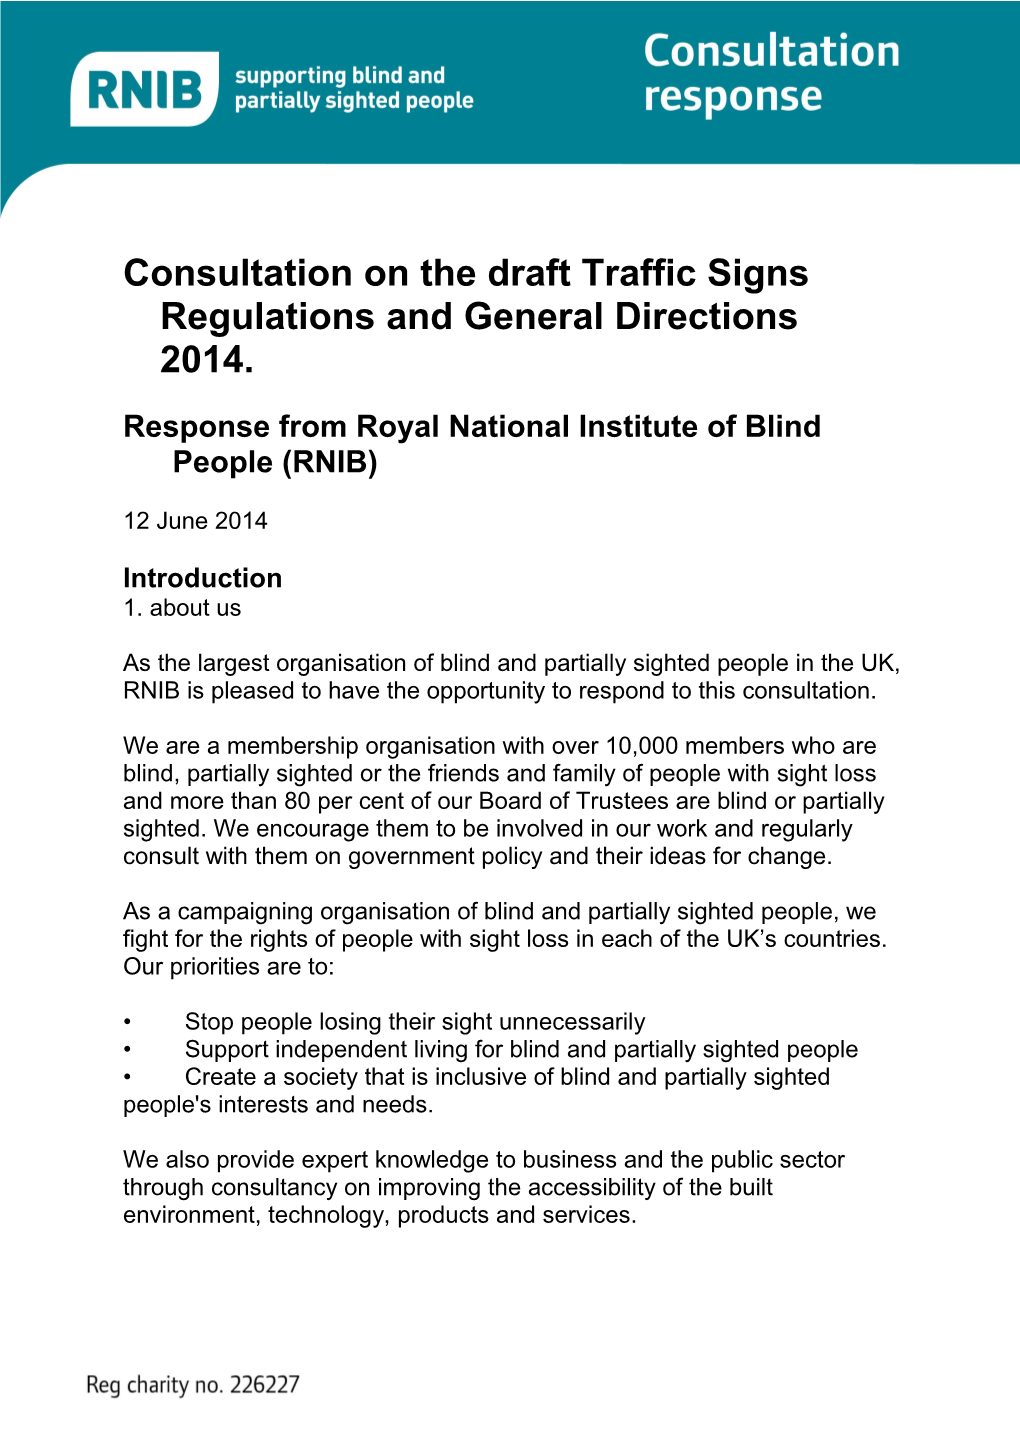 Consultation on the Draft Traffic Signs Regulations and General Directions 2014